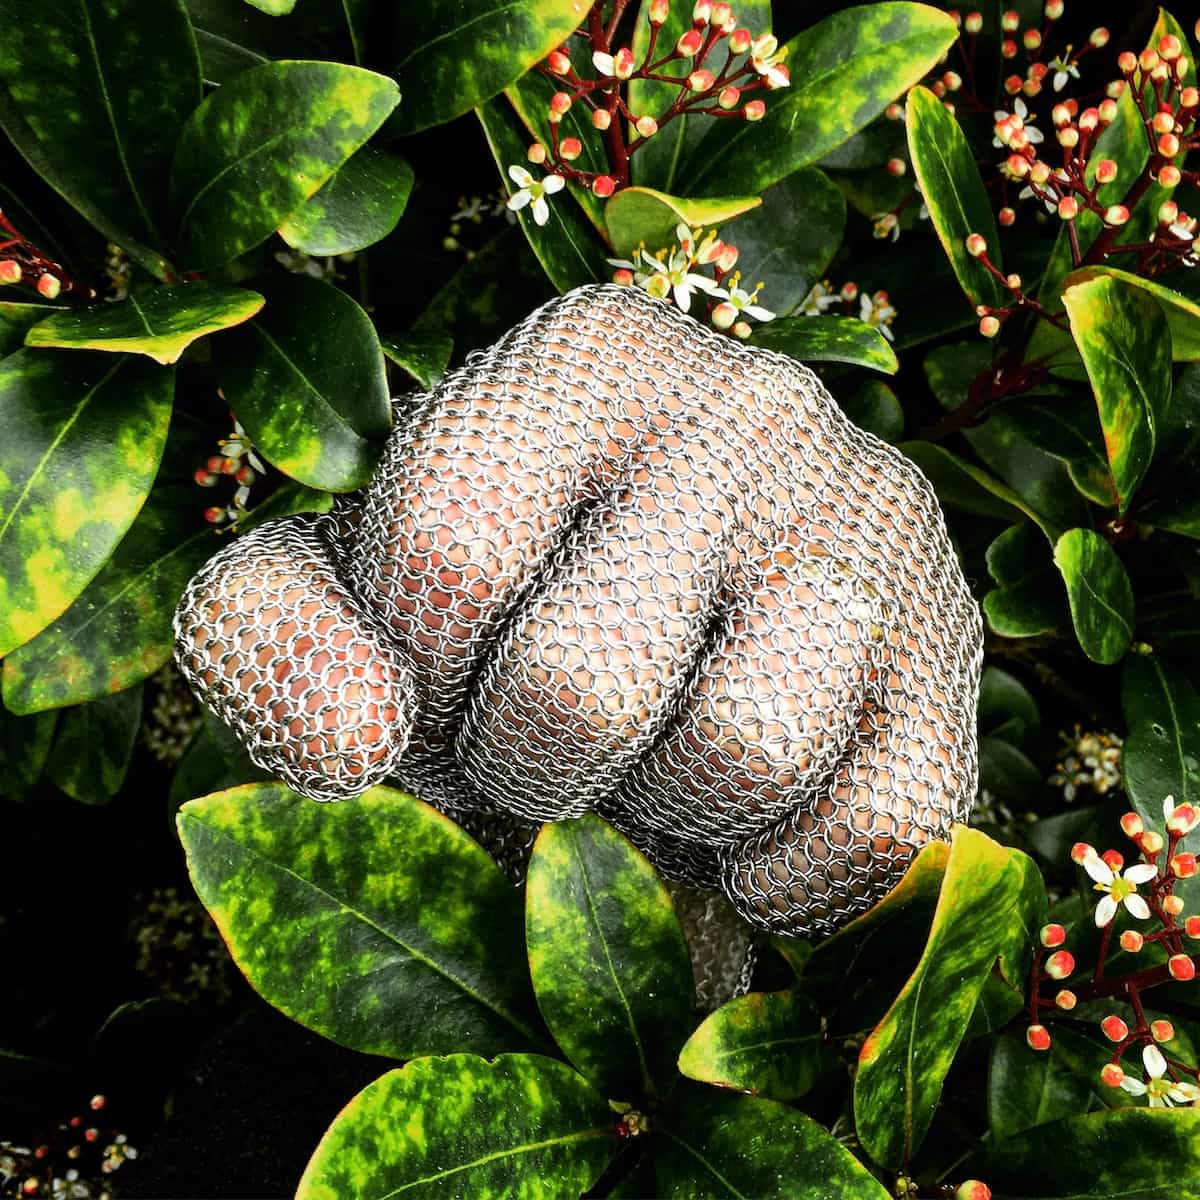 Human fist clad in steel mesh glove punching through green leaves and flowers.